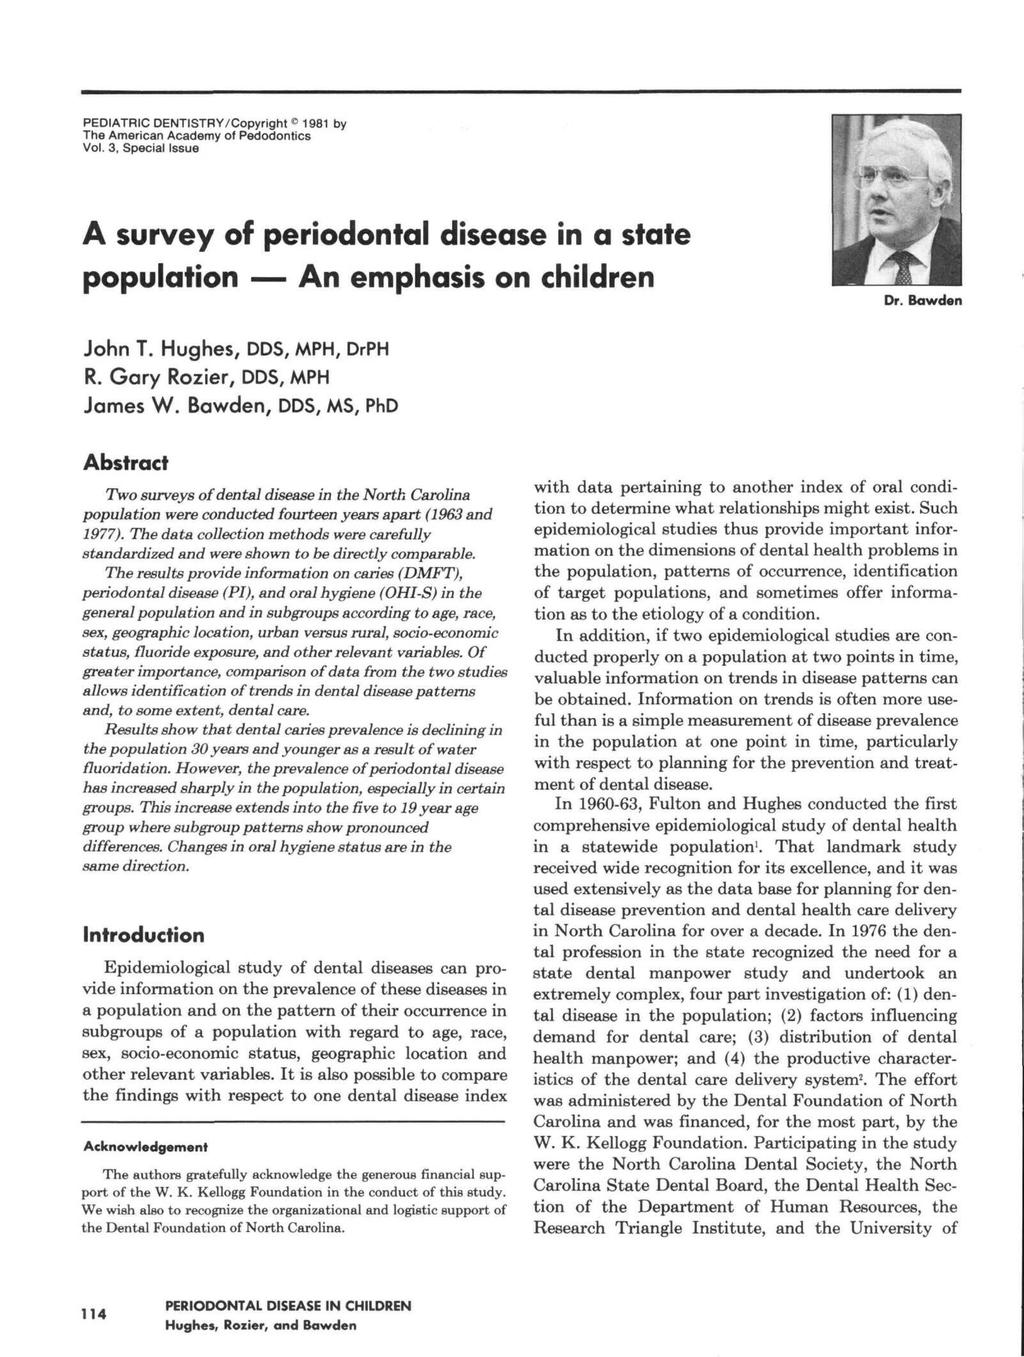 PEDIATRIC DENTISTRY/Copyright 1981 by The American Academy of Pedodontics Vol. 3, Special Issue A survey of periodontal disease in a state population An emphasis on children Dr. Bawden John T.